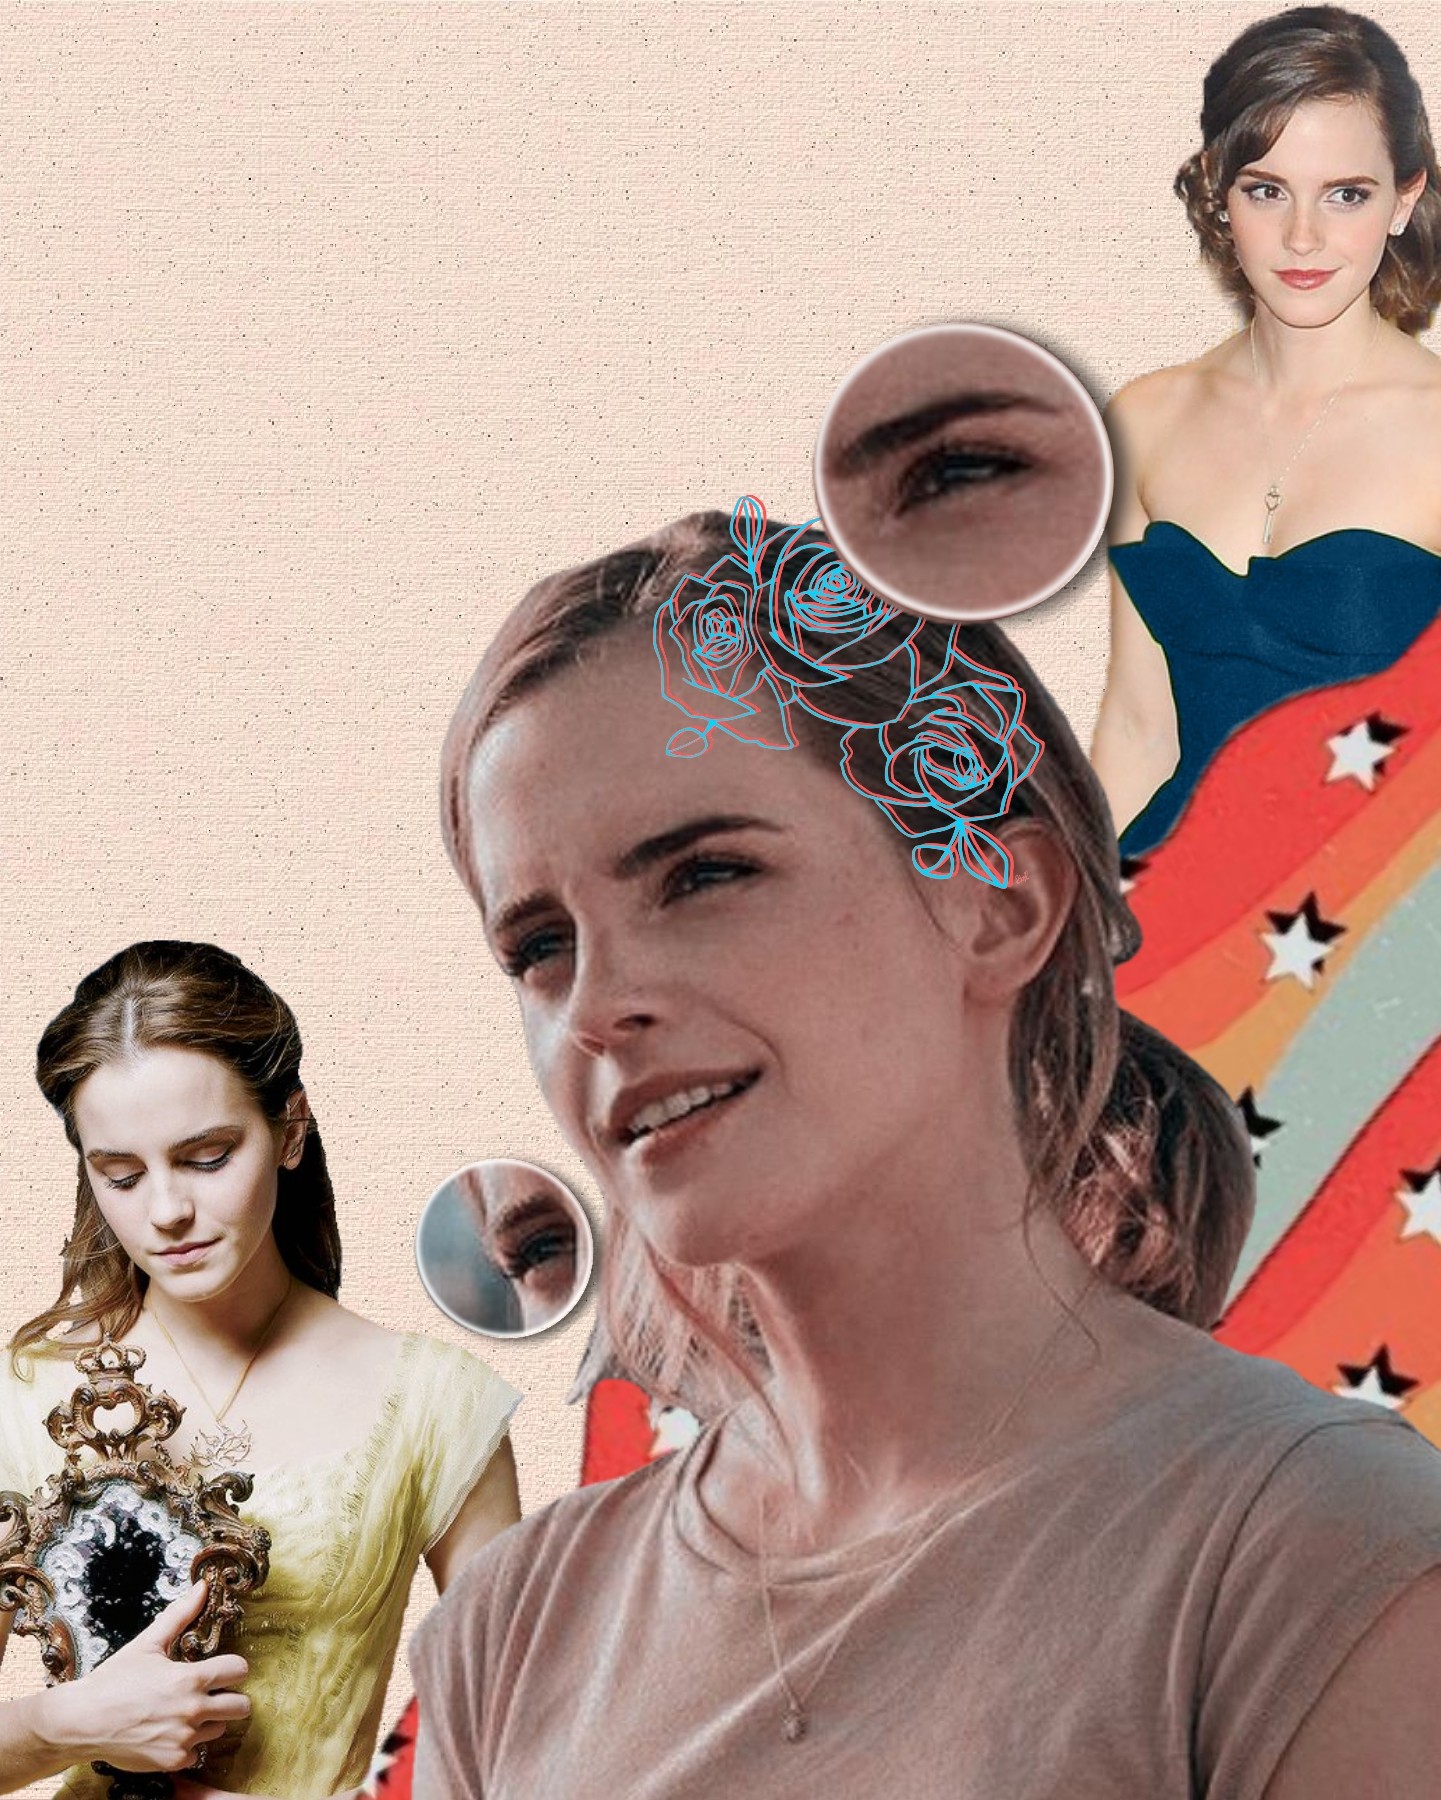 🌹tap🌹
Emma Watson
Do you guys want me to do contest?
Also
Do you still know I exist?